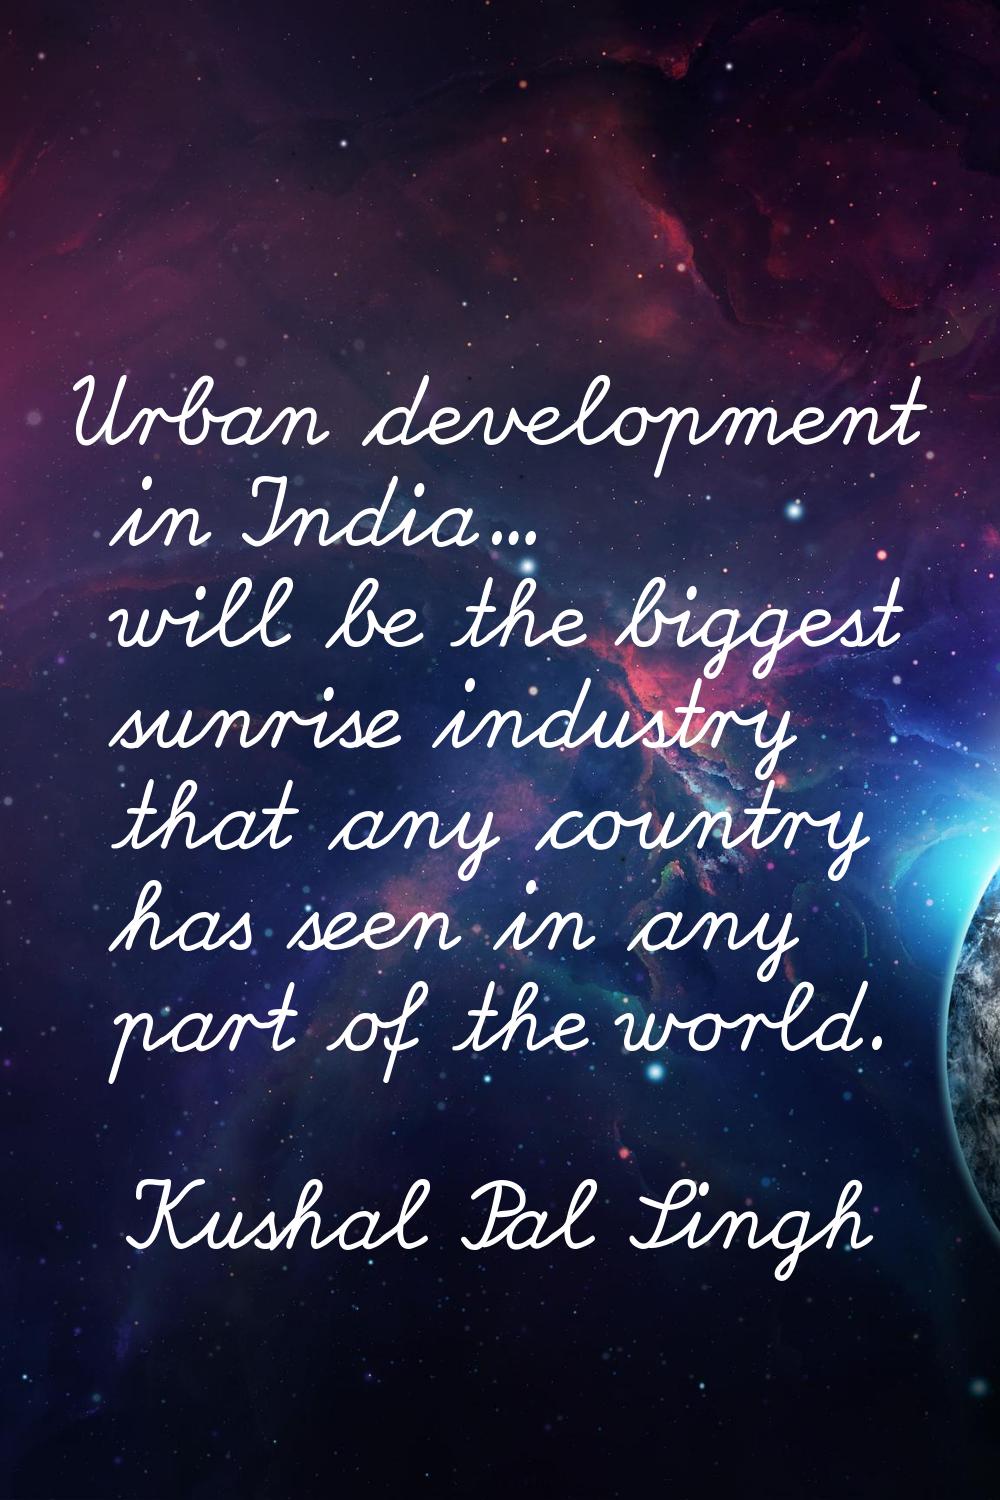 Urban development in India... will be the biggest sunrise industry that any country has seen in any